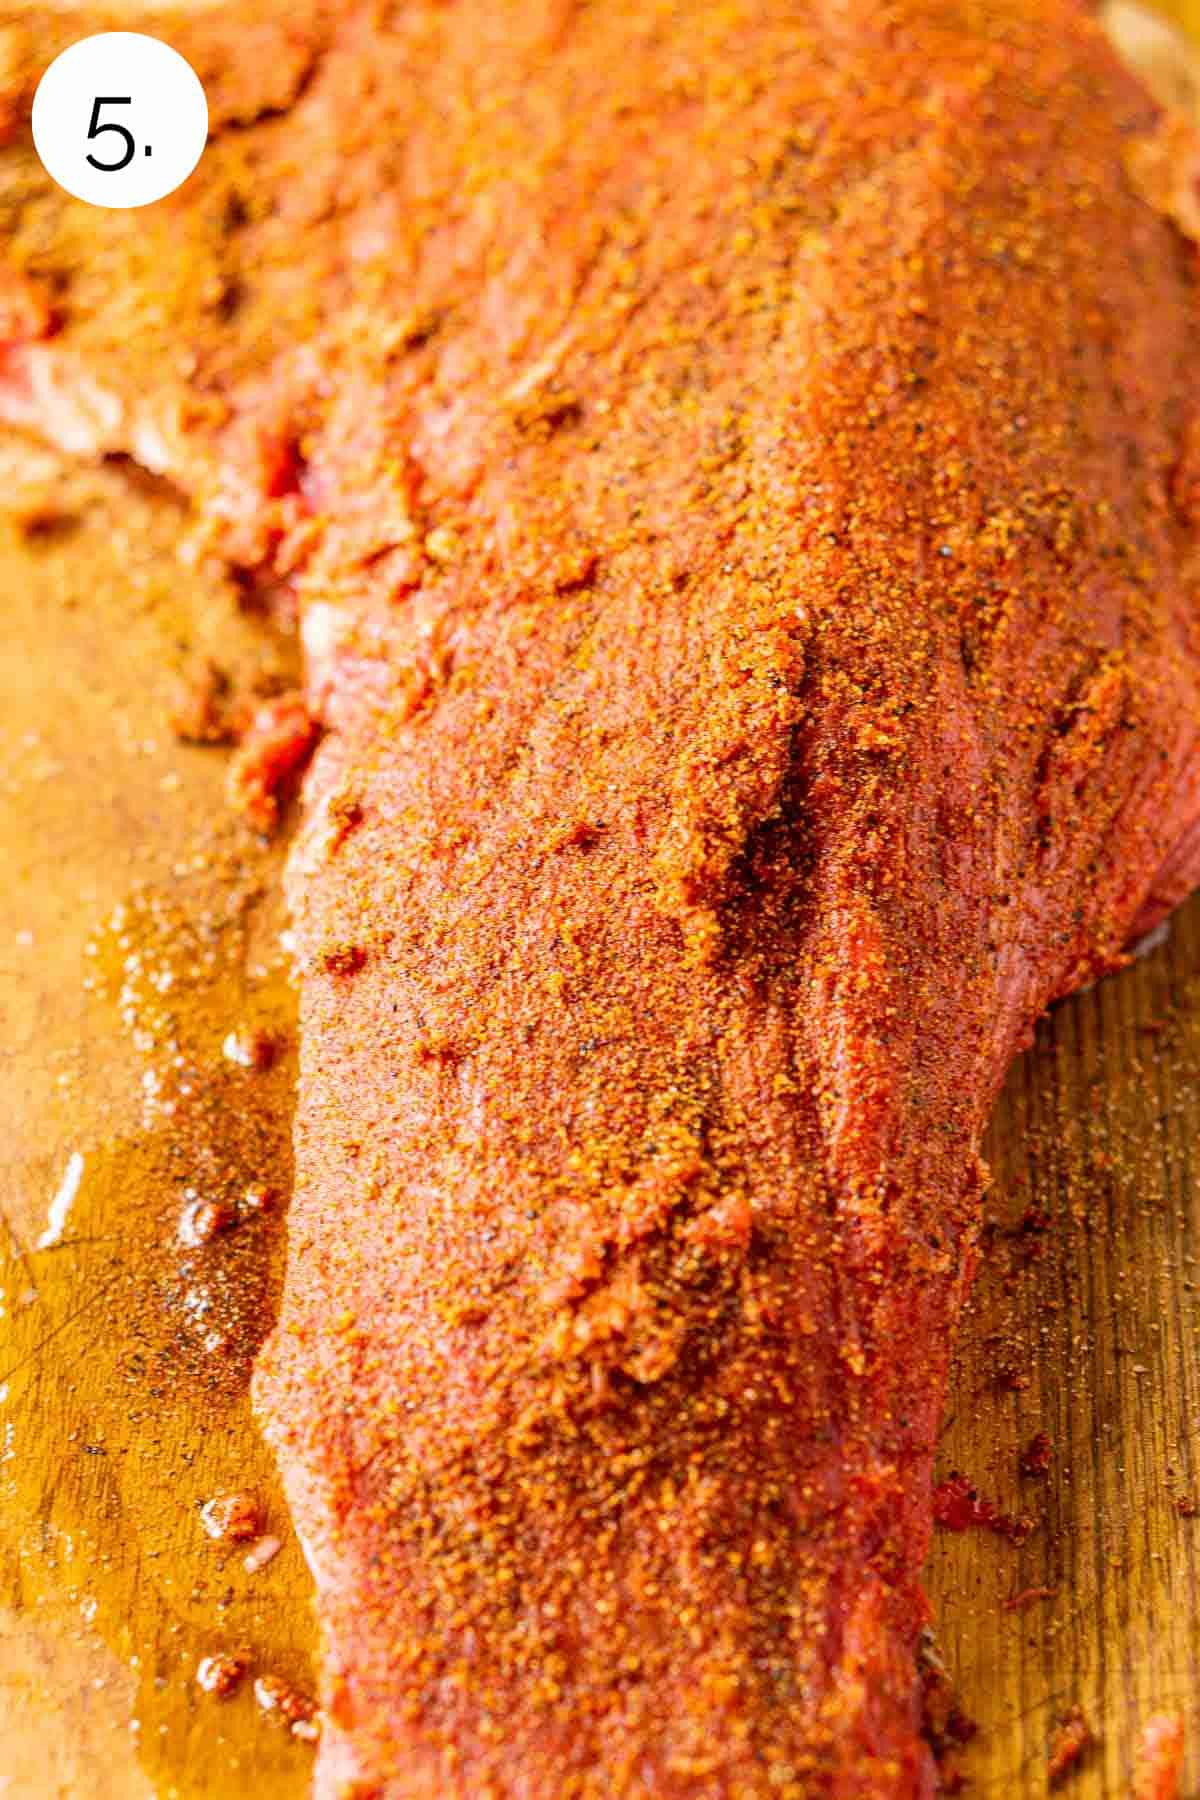 The beef coated in the spice mixture on a wooden cutting board before going on the smoker.